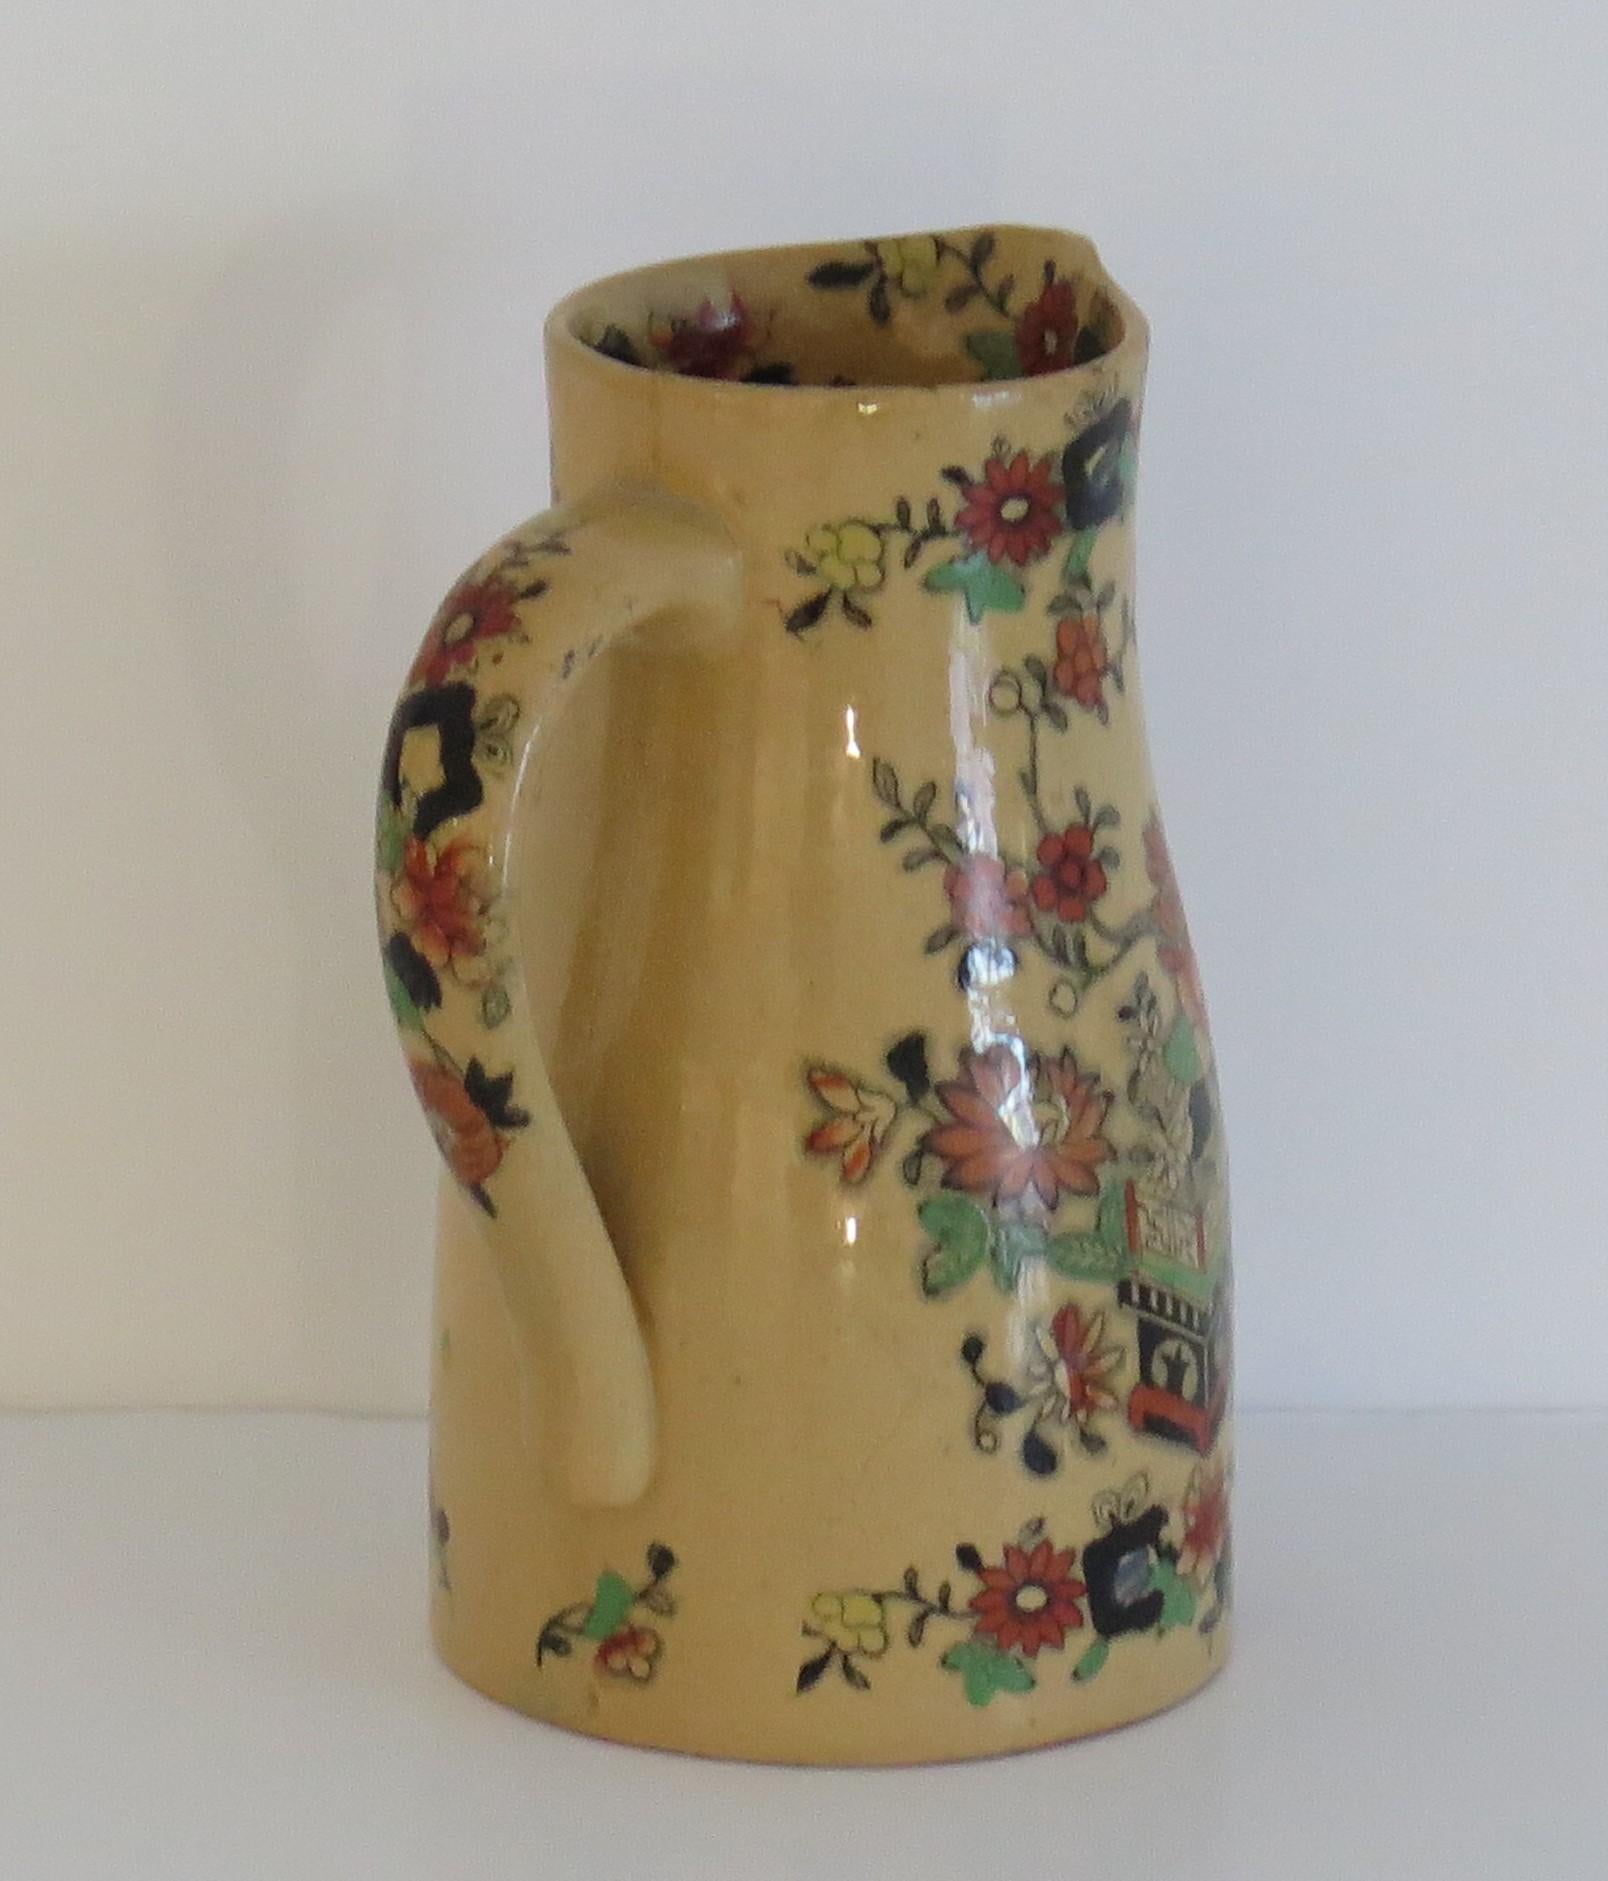 Hand-Painted Mason's Ironstone Jug or Pitcher in Flower Box hand painted Pattern, circa 1840